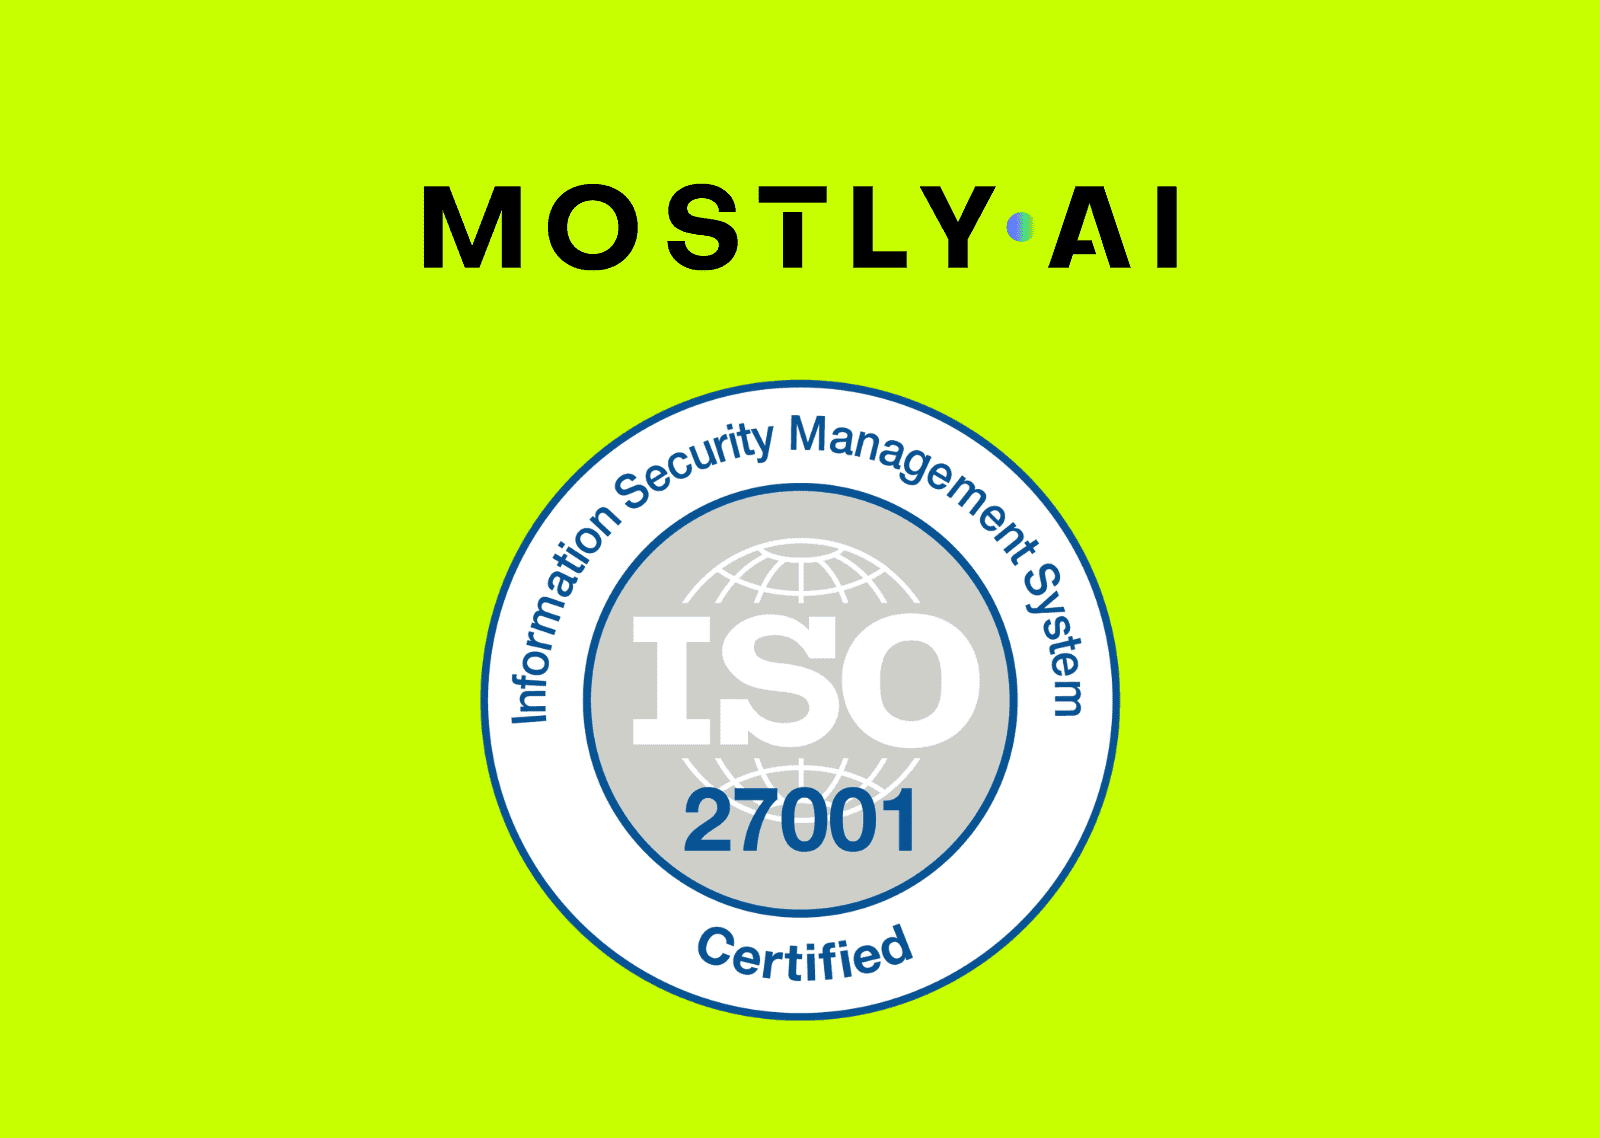 MOSTLY AI gets ISO certified